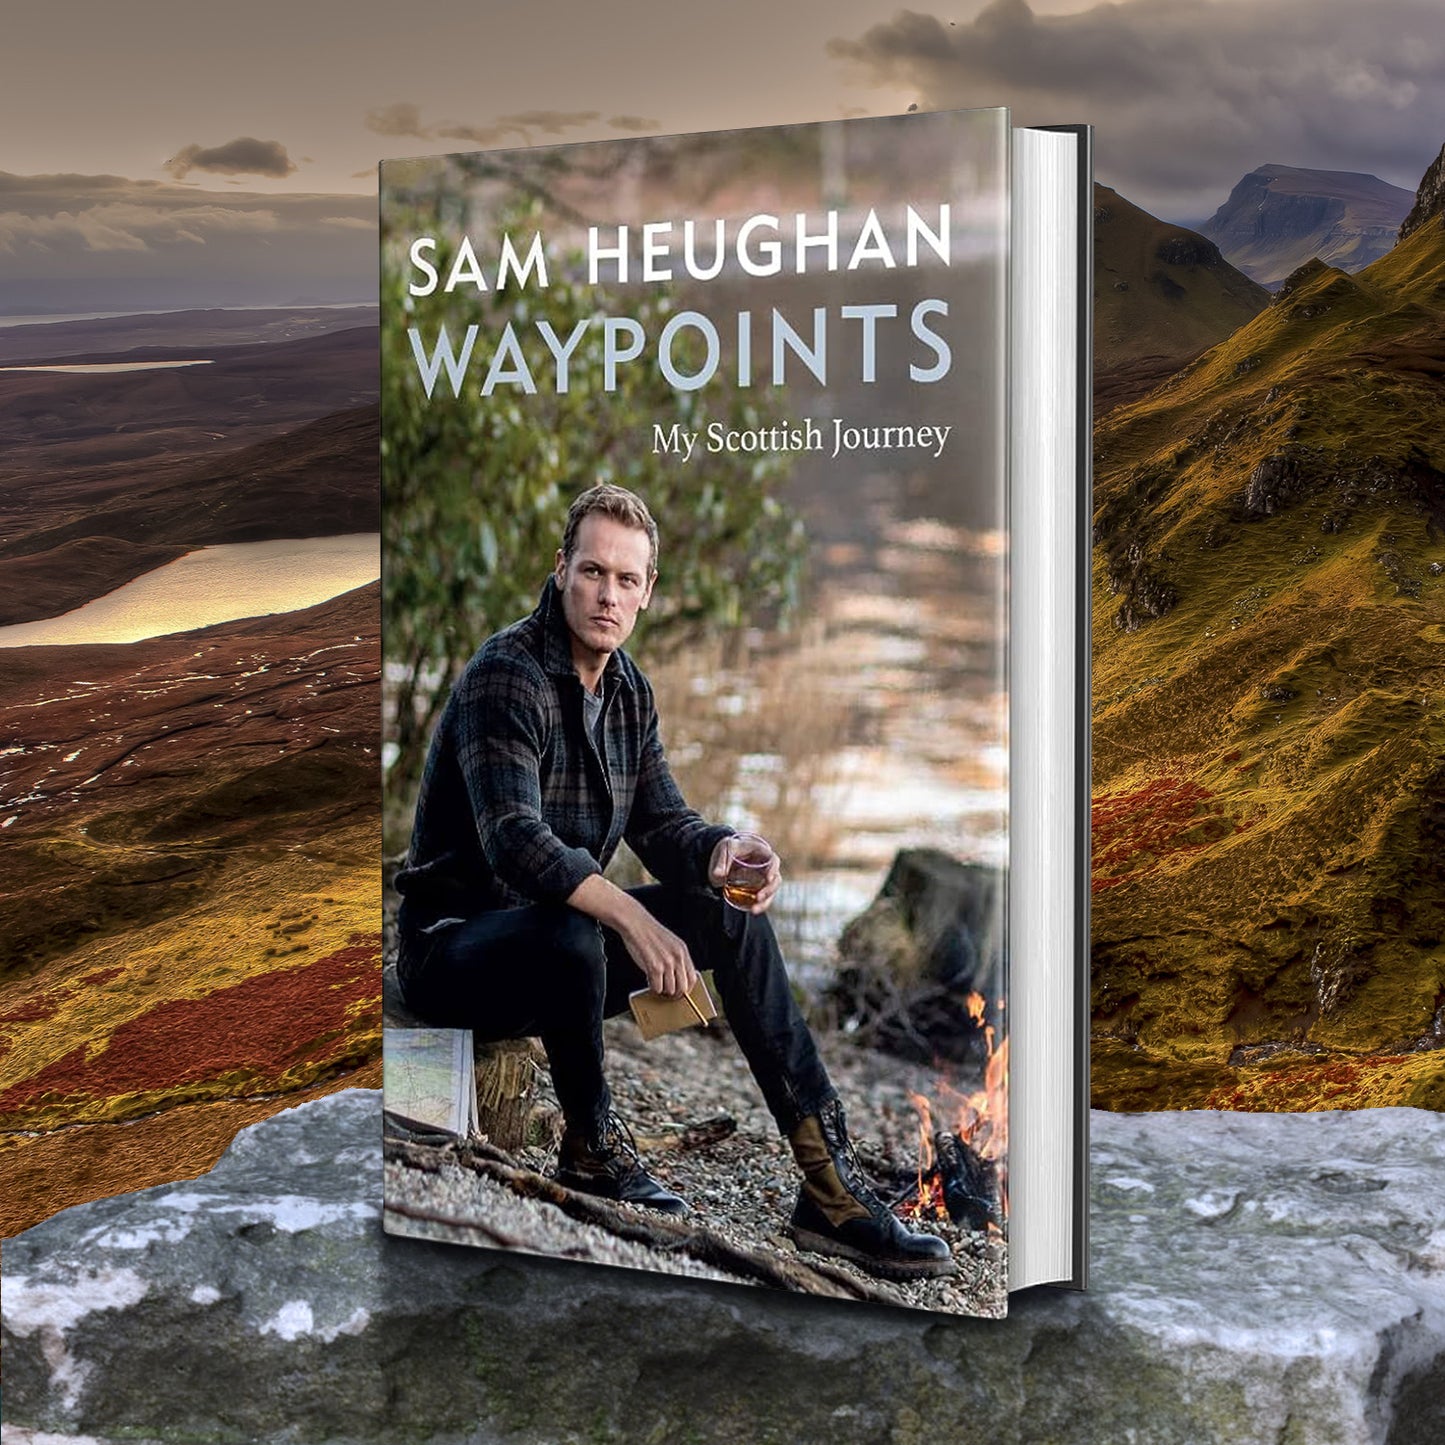 An image of a book standing on a flat rock, in front of a mountain scape. On the front of the book cover is actor Sam Heughan, sitting on a rock in front of a River. At the top in white text is "Sam Heughan: Waypoints, my scottish journey."